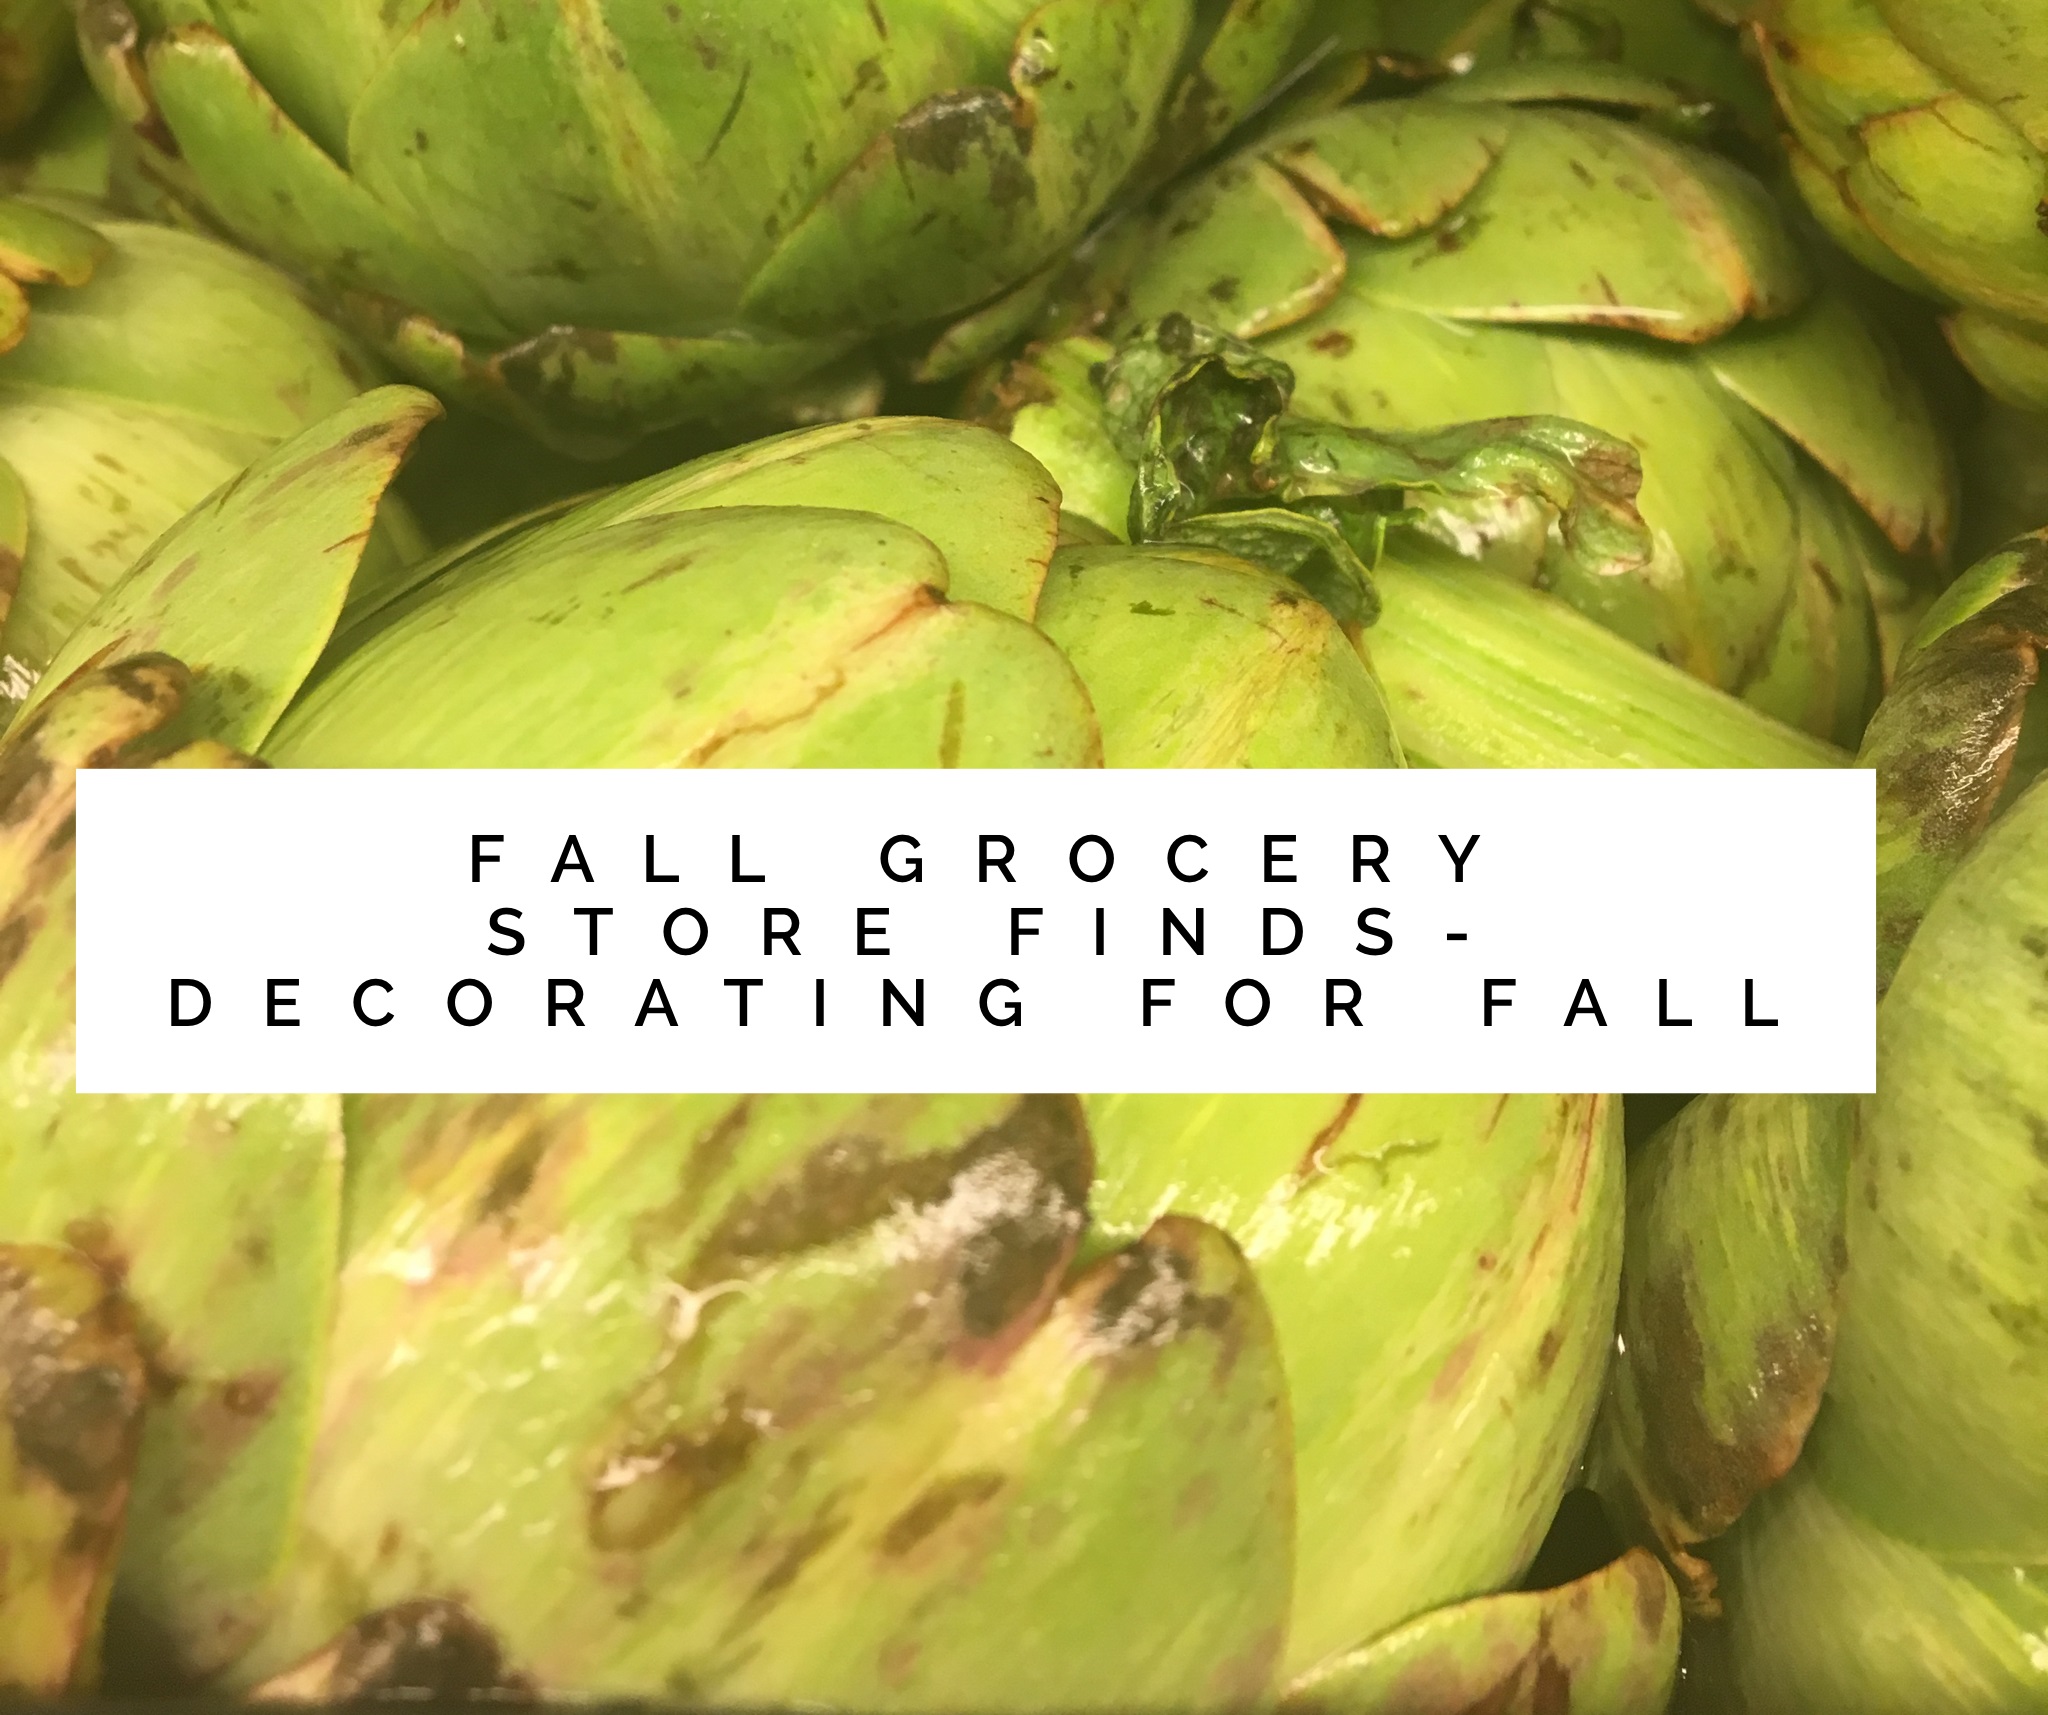 Fall Grocery Store Finds-Decorating For Fall